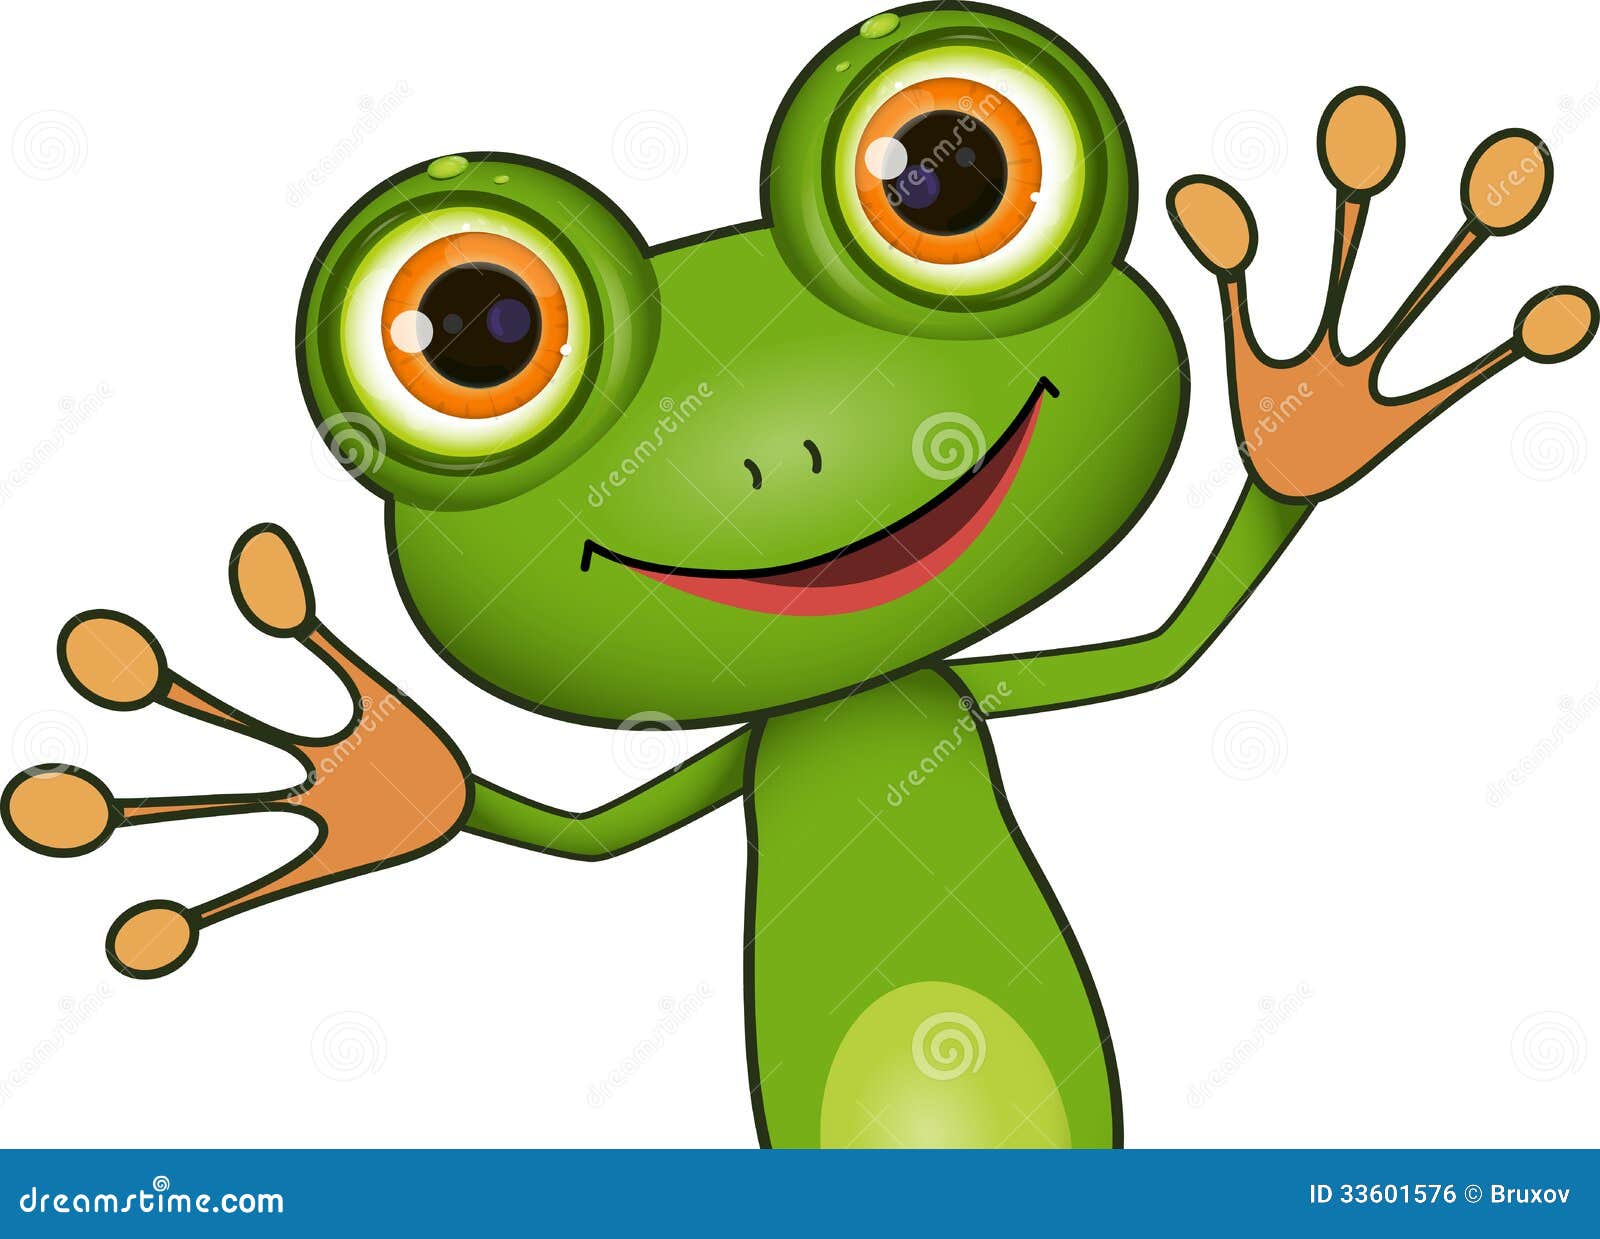 free frog graphics clipart - photo #43